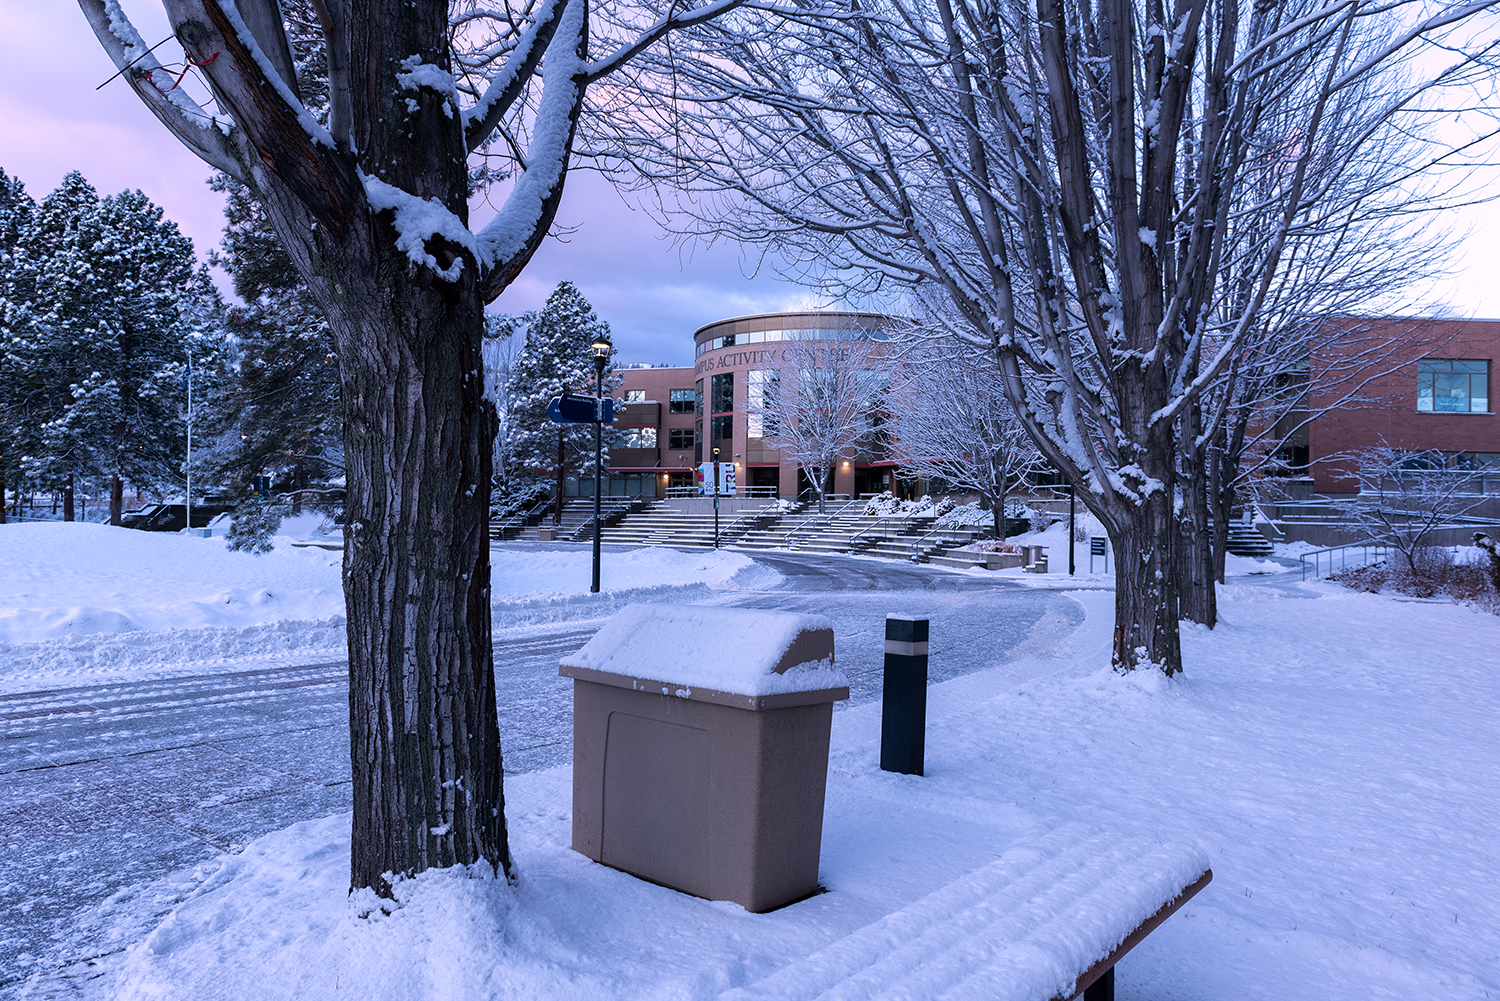 Kamloops Cityscape snow with bare trees and trash bins